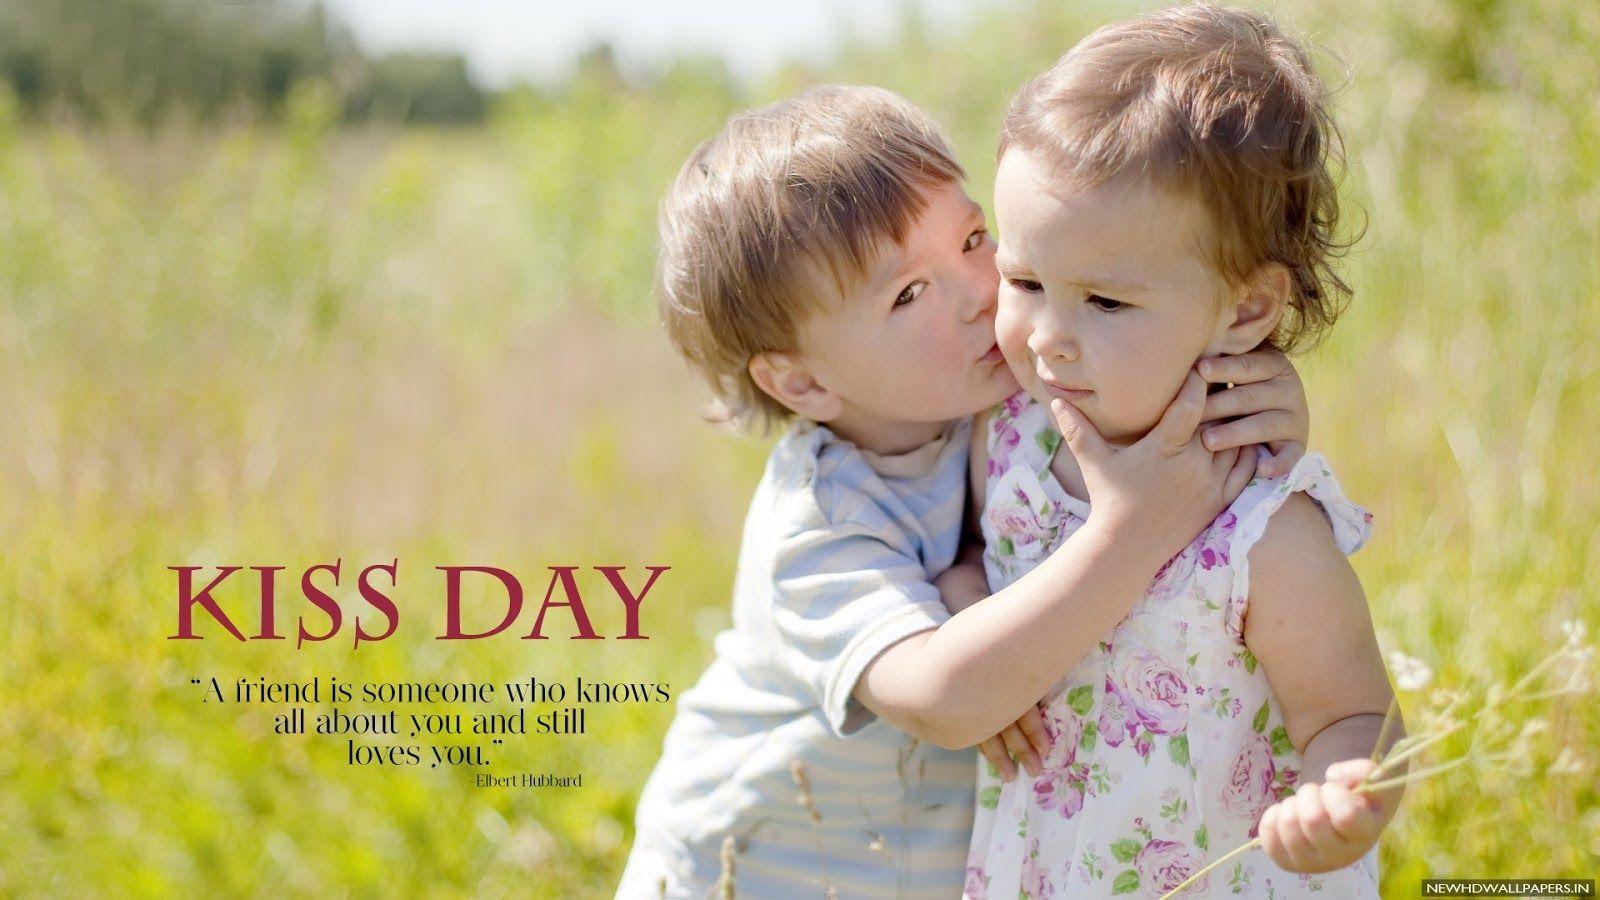 Best ideas about Kiss Day Image. Happy kiss day